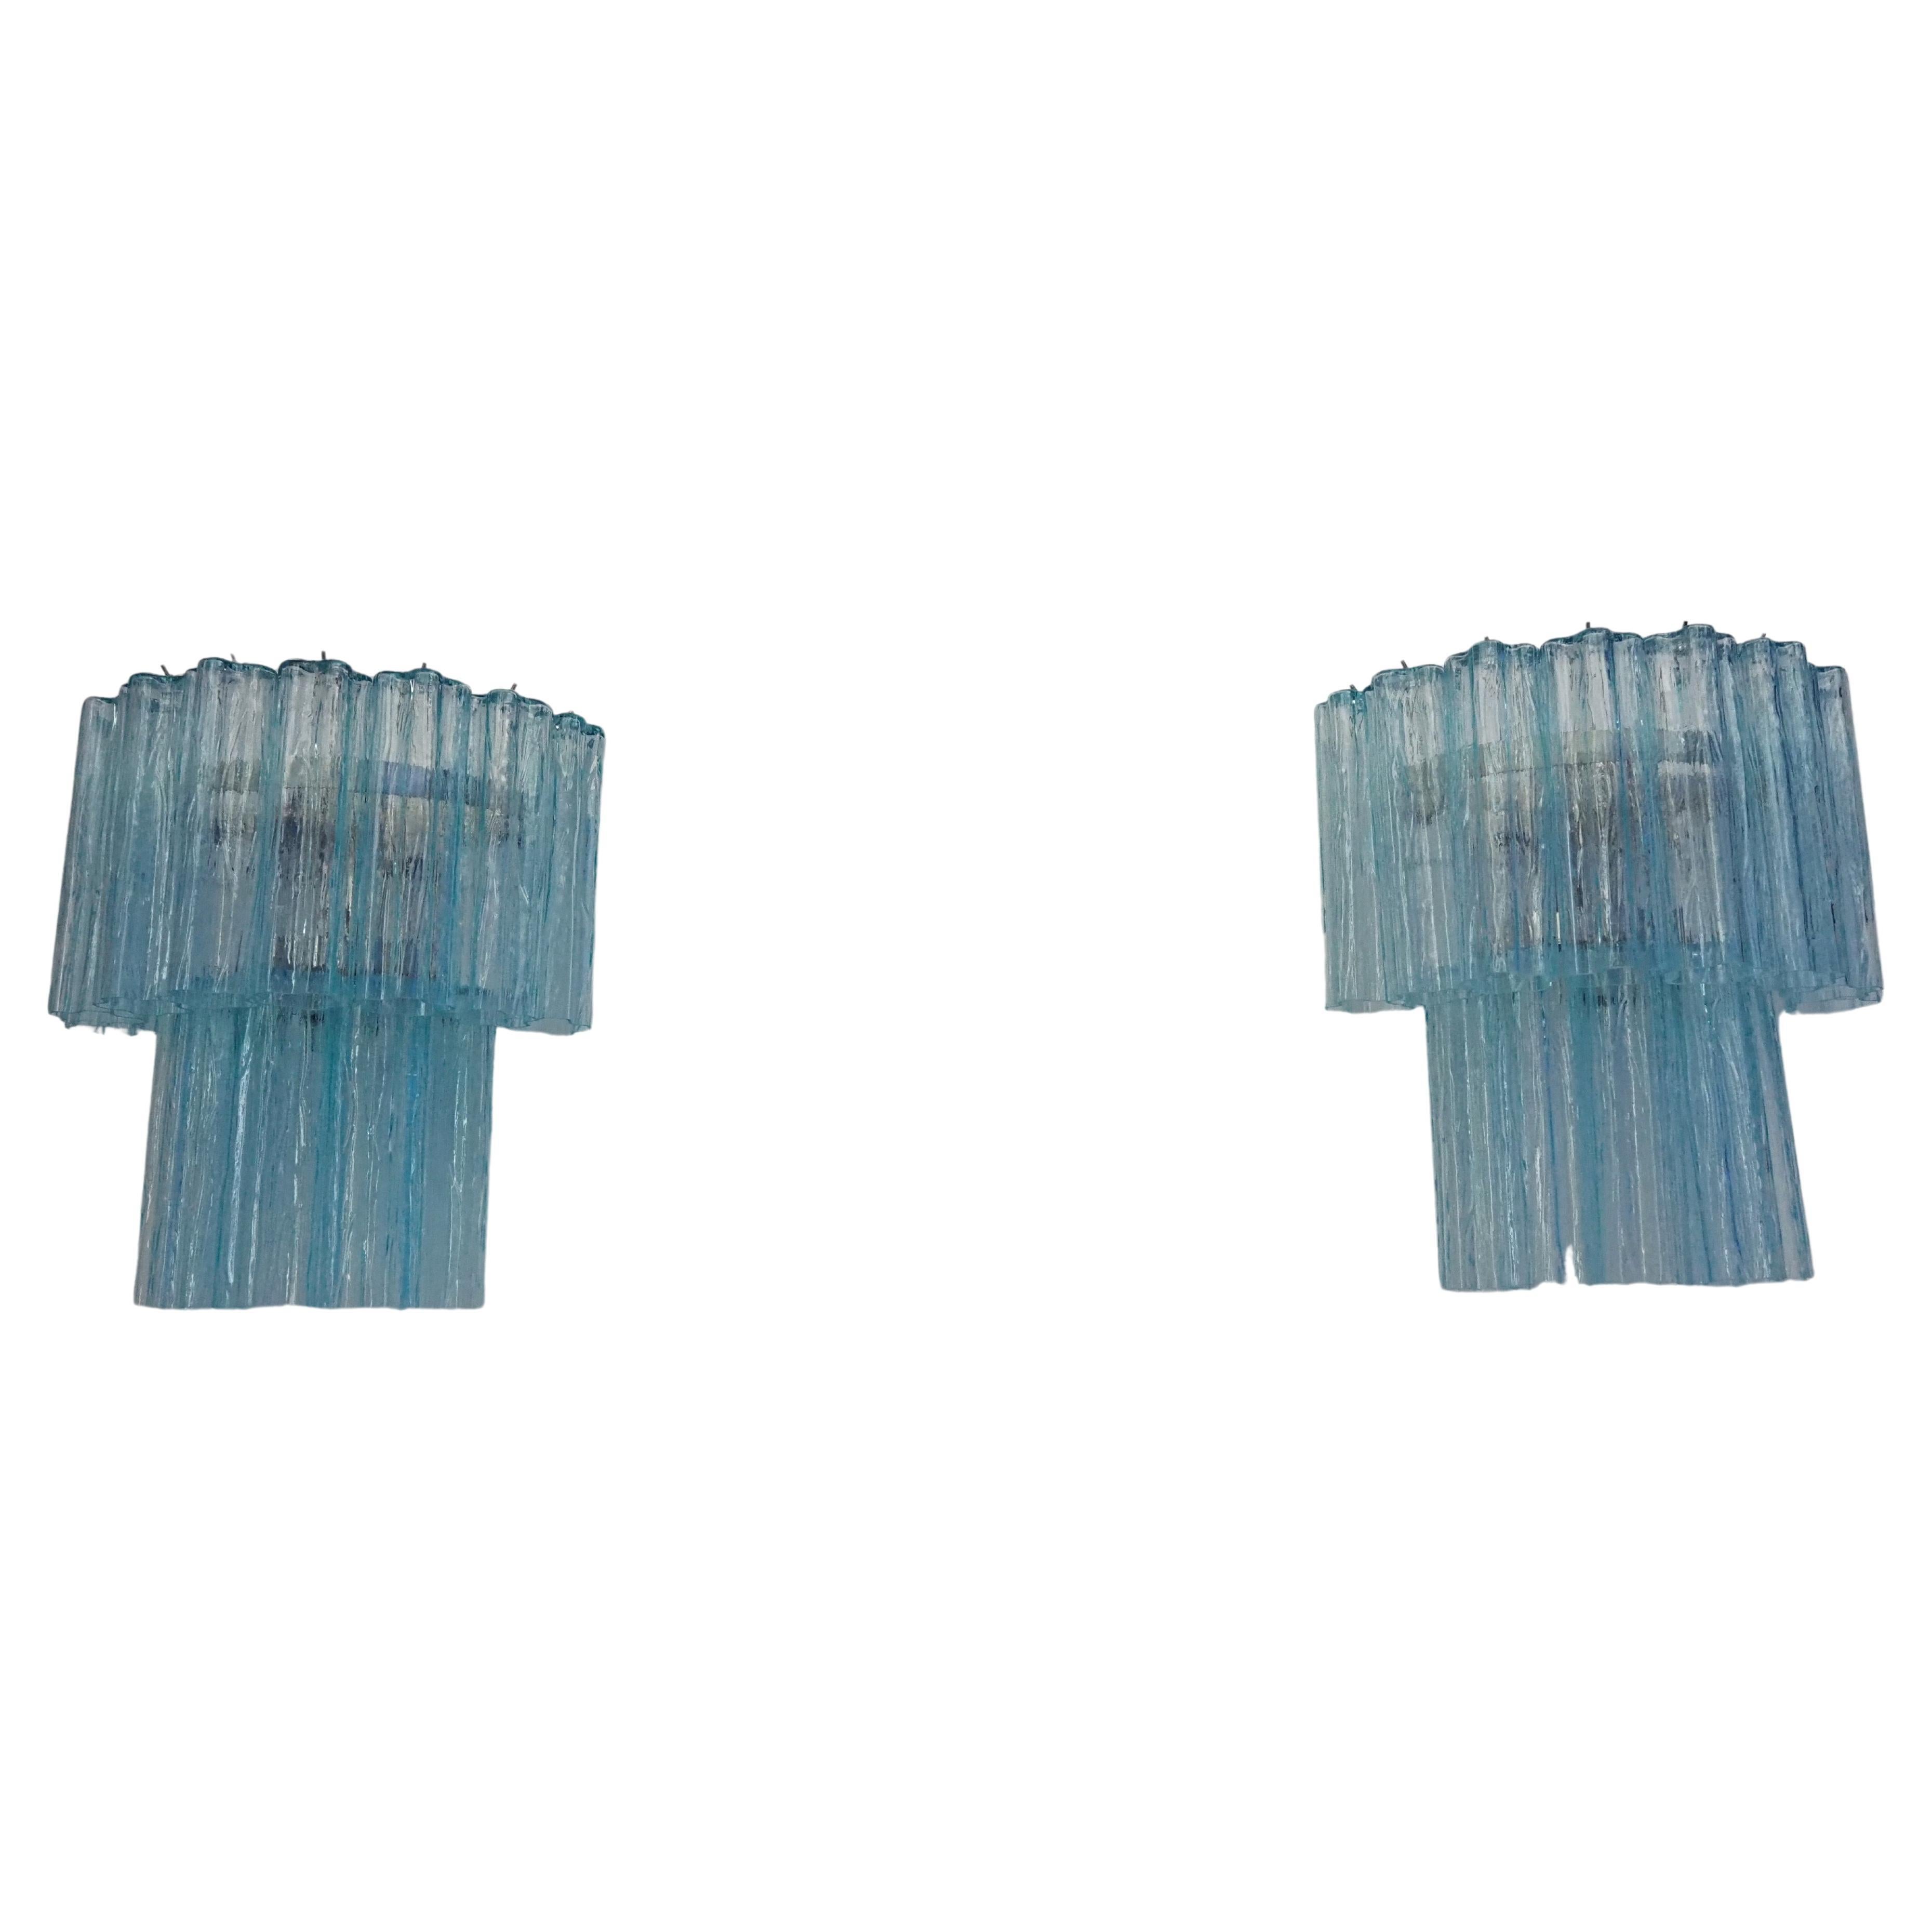 Fantastic pair of Murano Glass Tube wall sconces - 13 blue glass tube